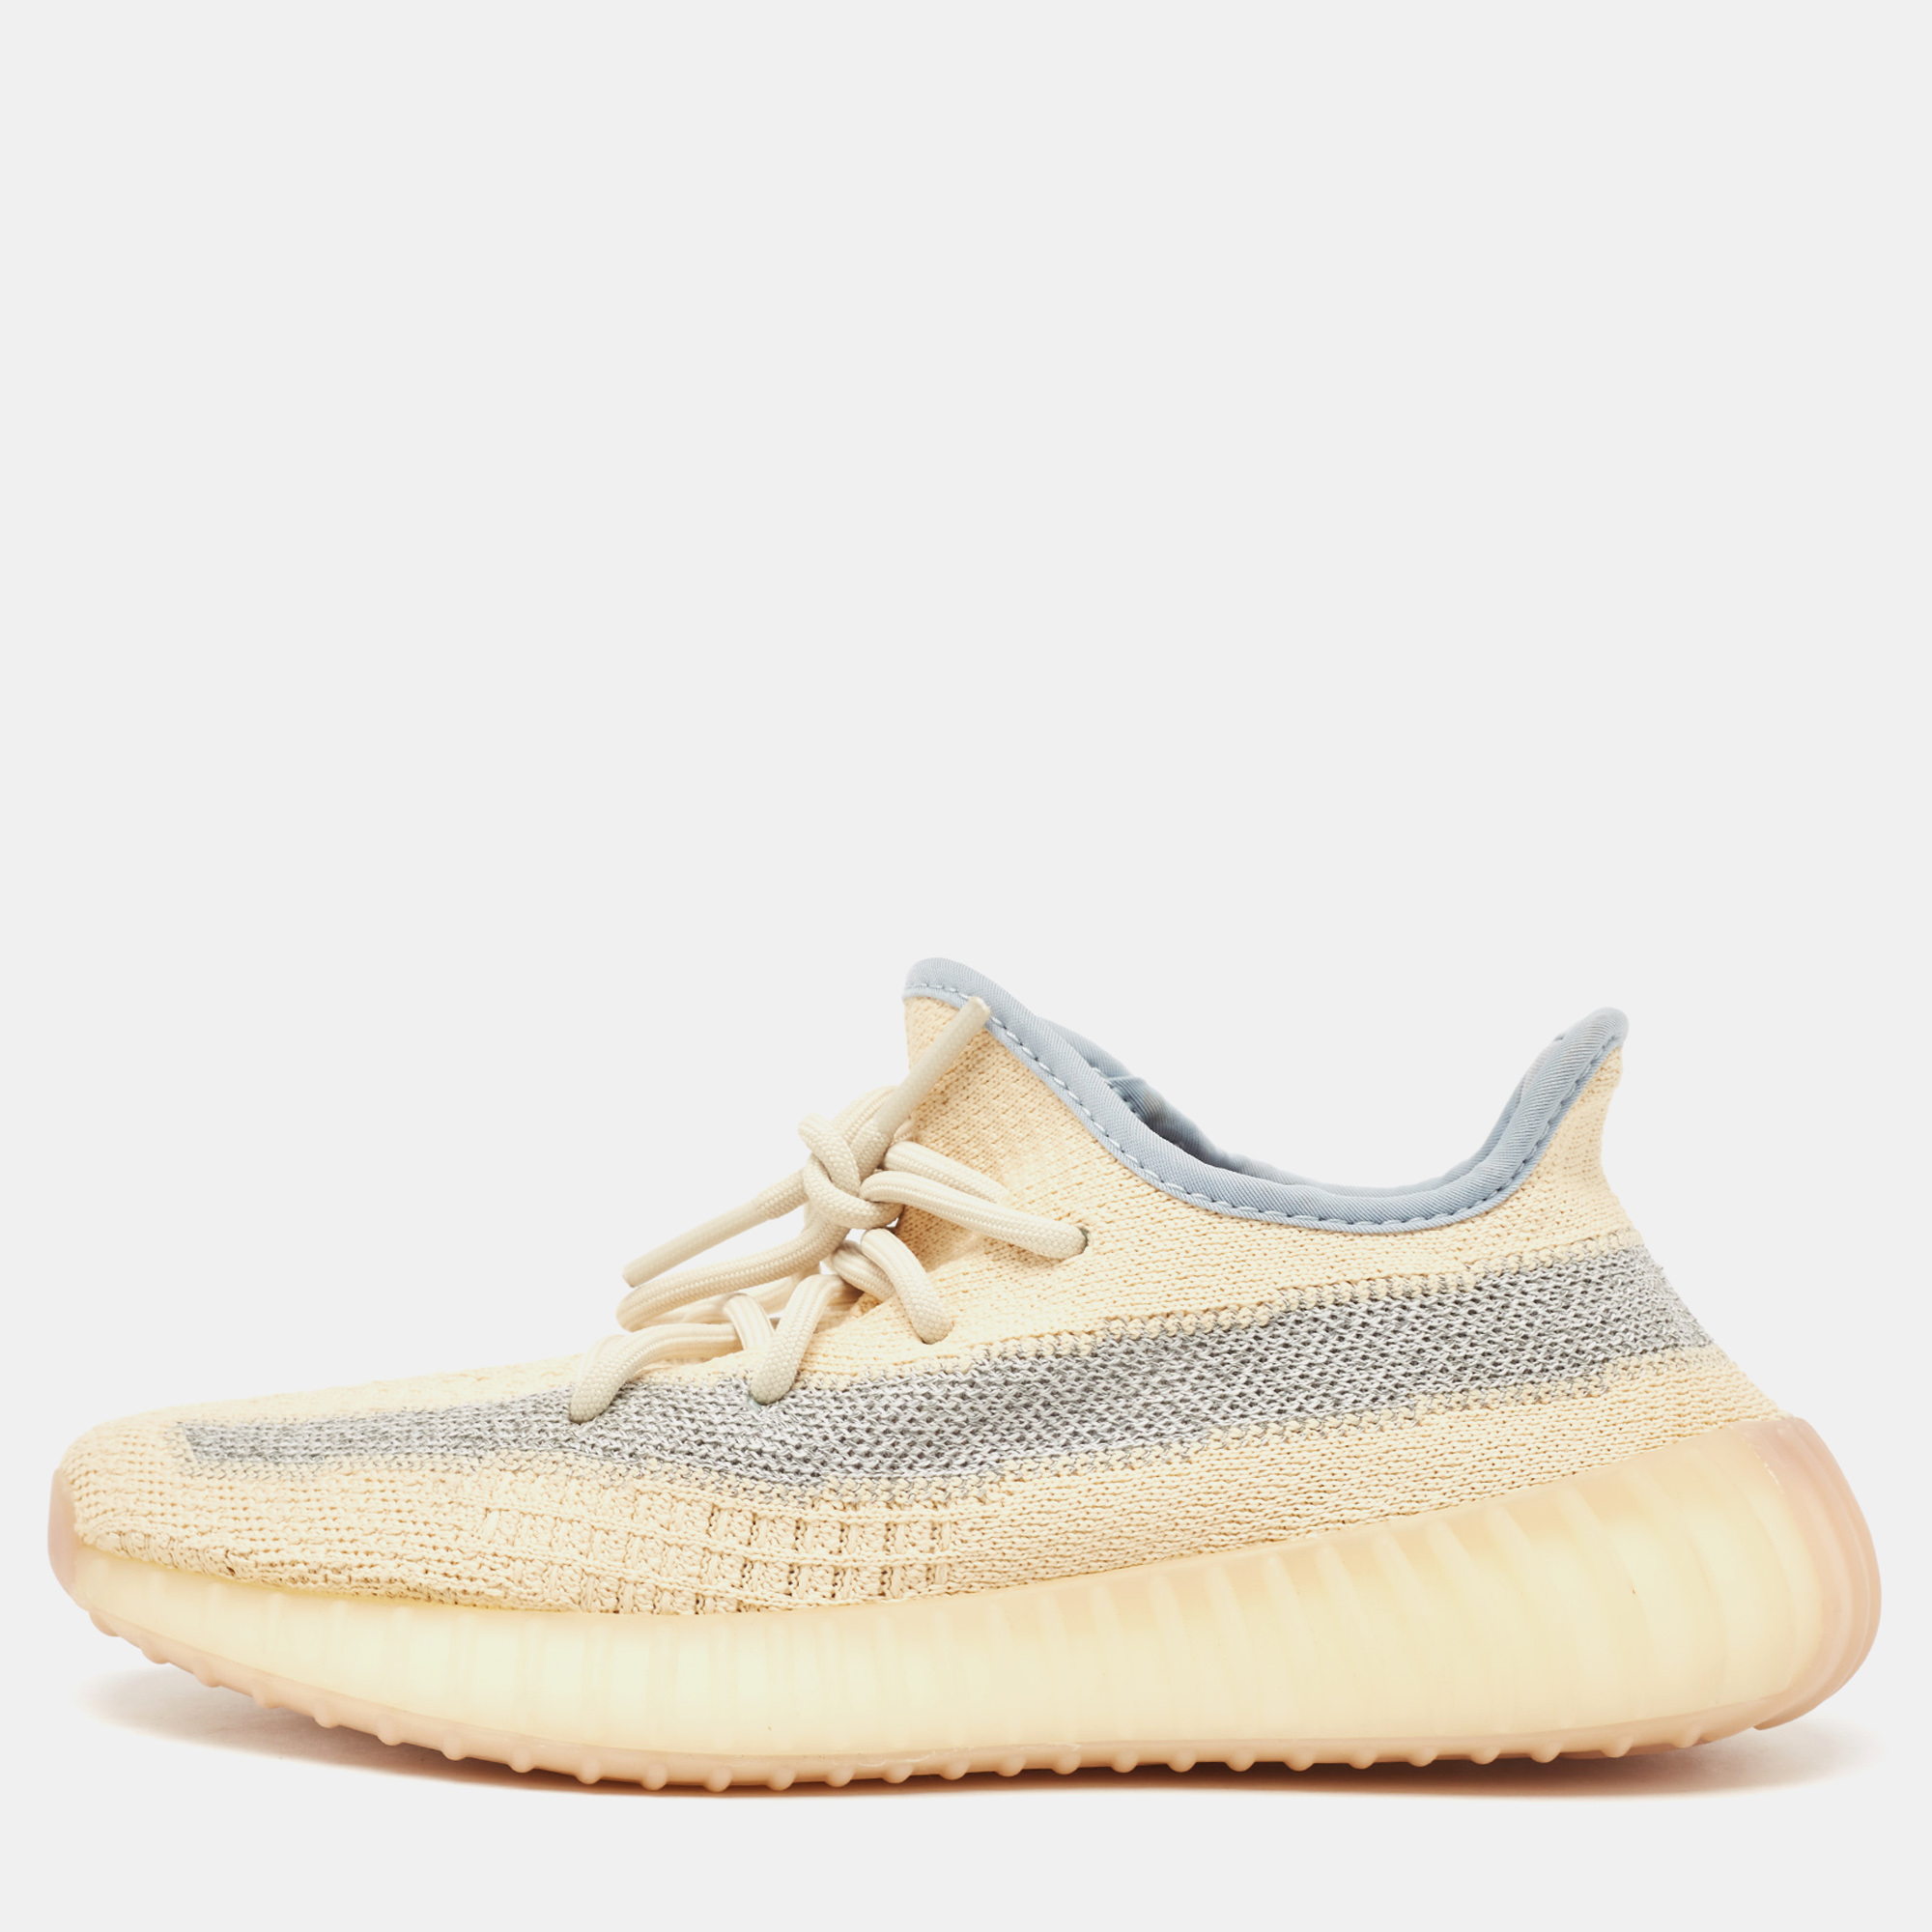 

Yeezy x Adidas Light Yellow Knit Fabric Boost 350 V2 Linen Sneakers Size 38